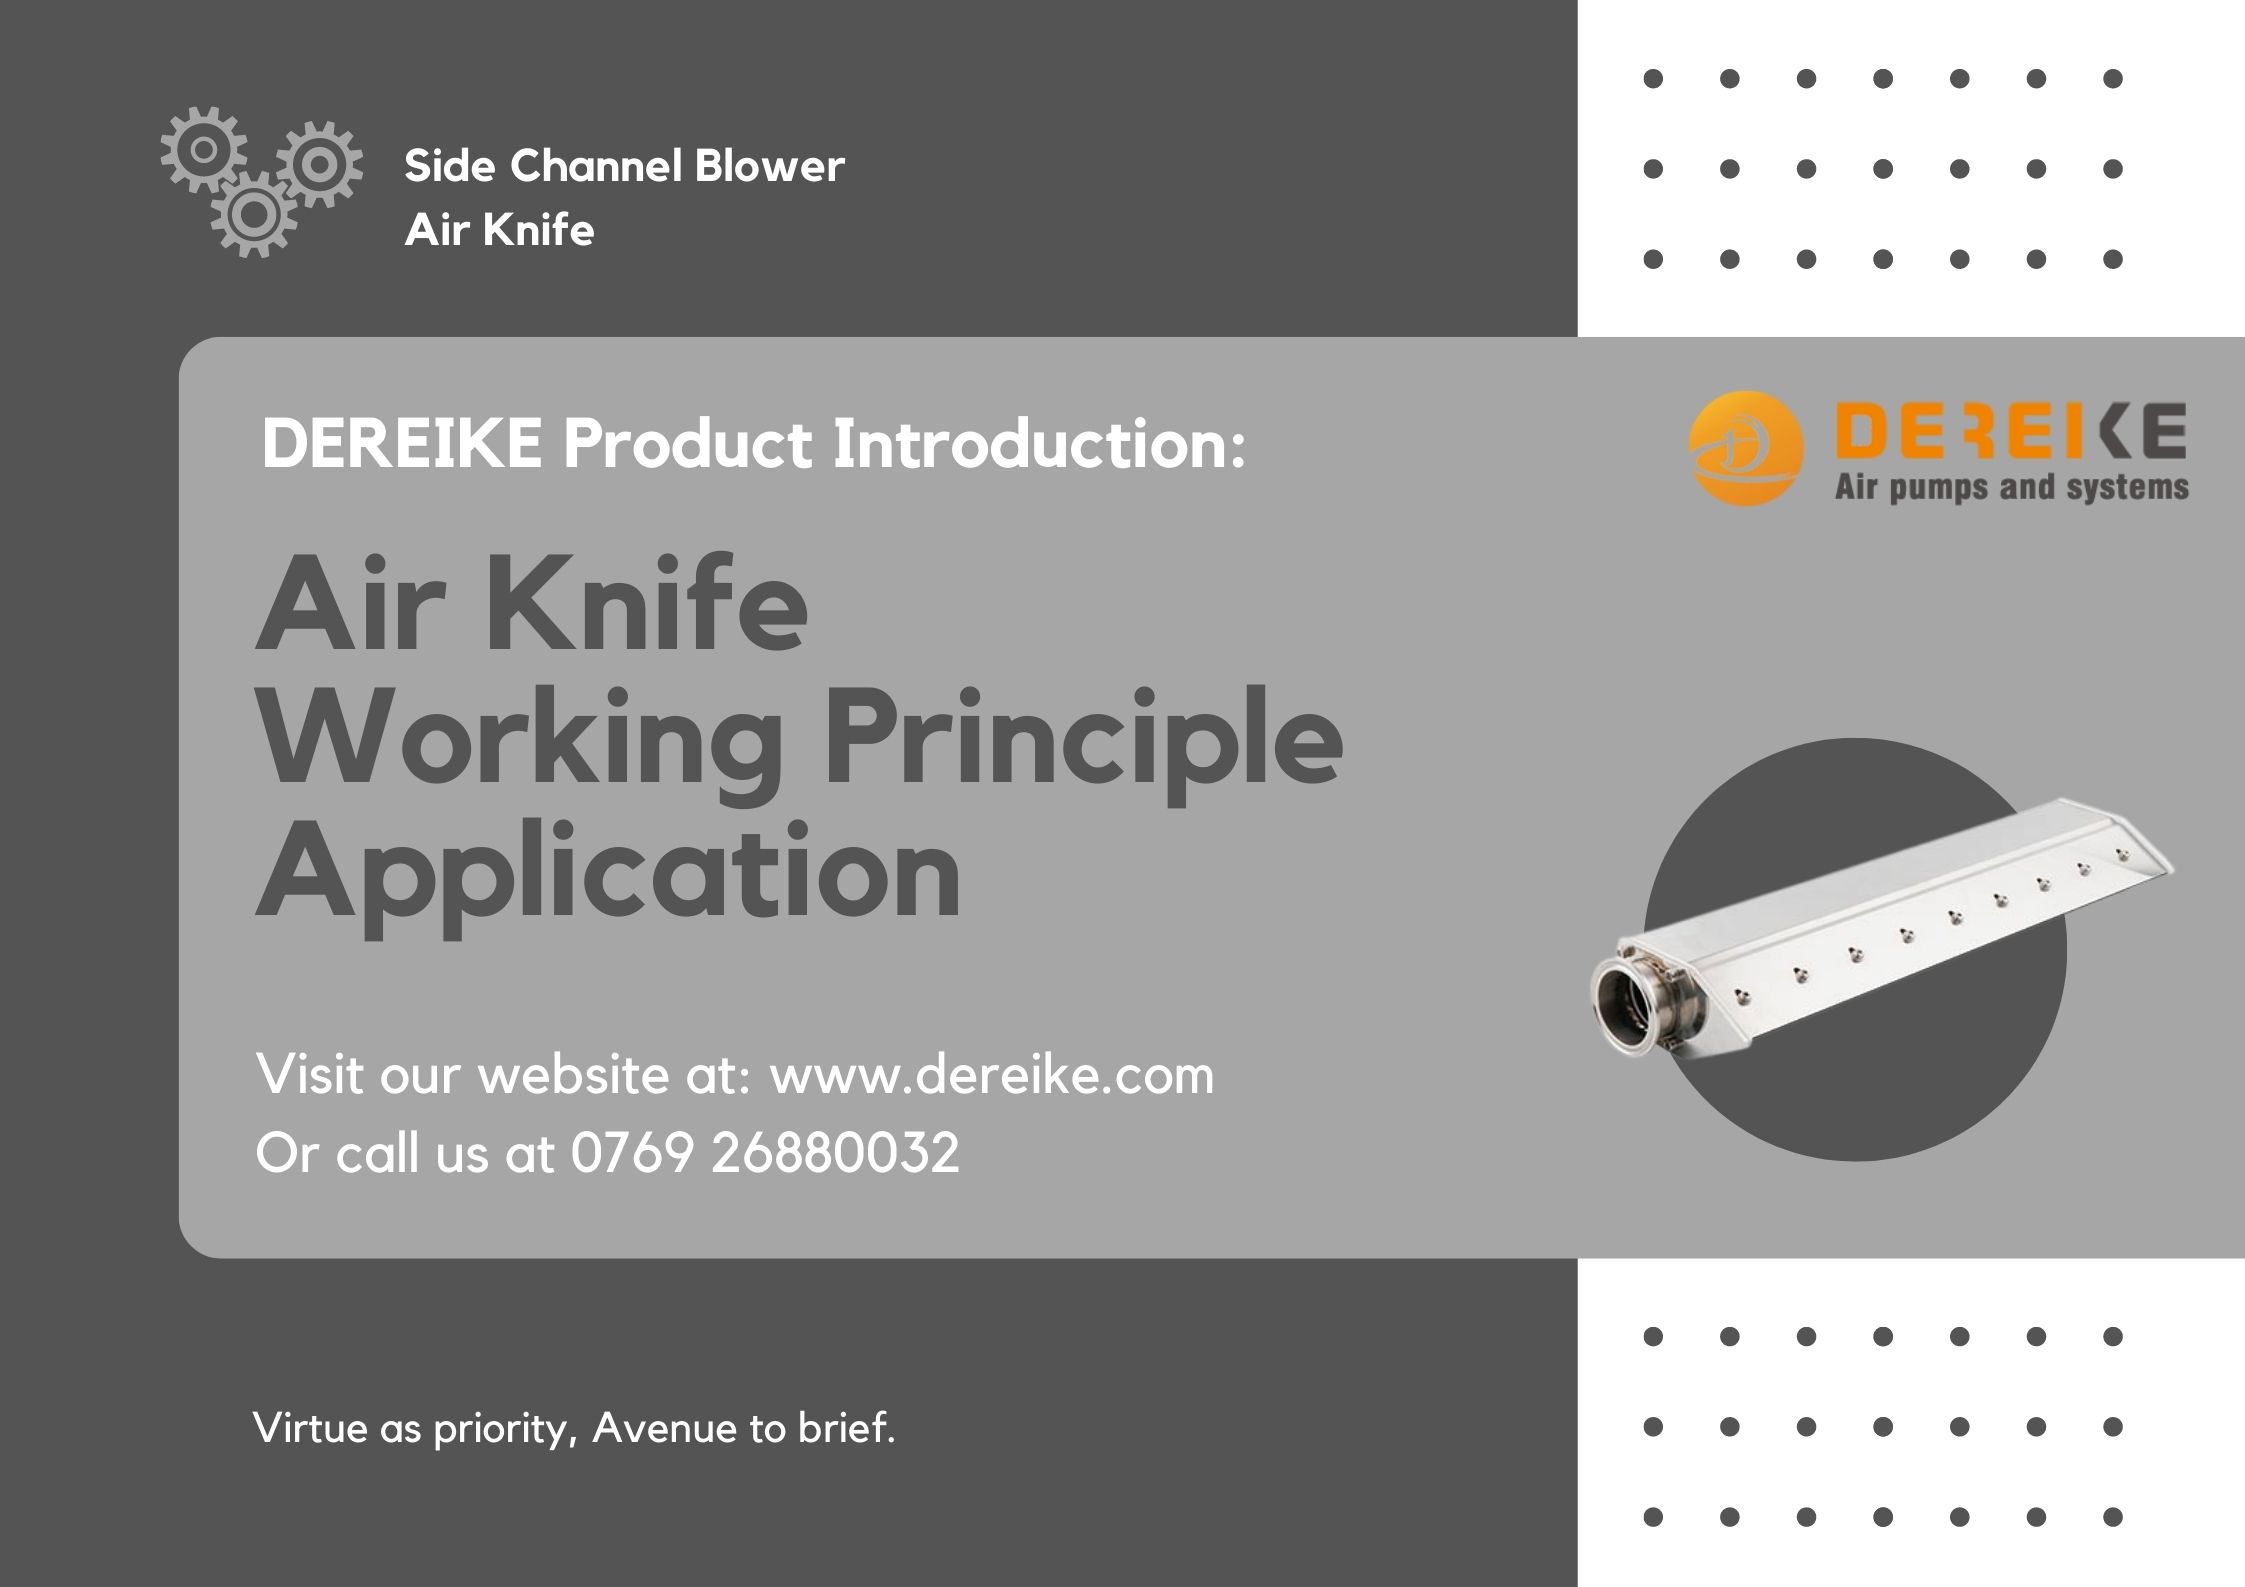 Air knife working principle and applicaiton